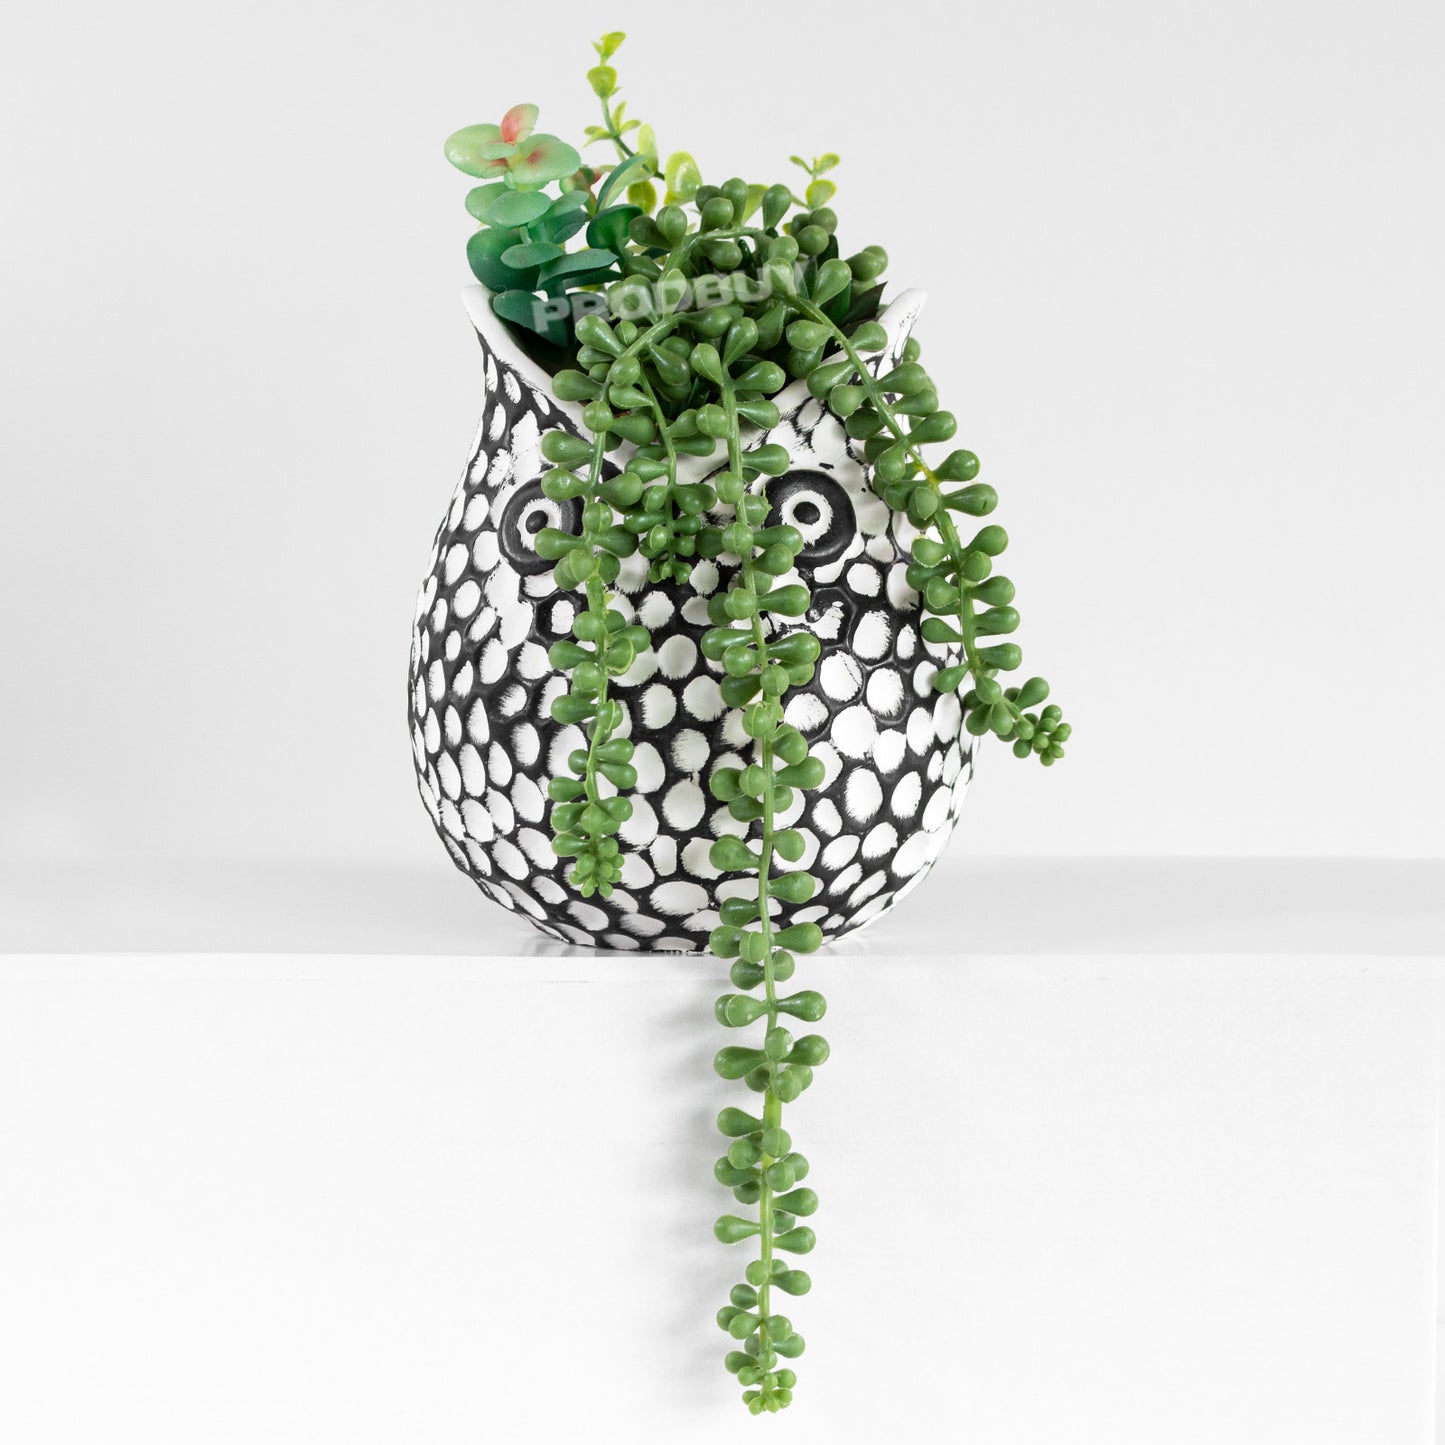 Owl Shaped Plant Pot with Artificial Houseplant Decoration